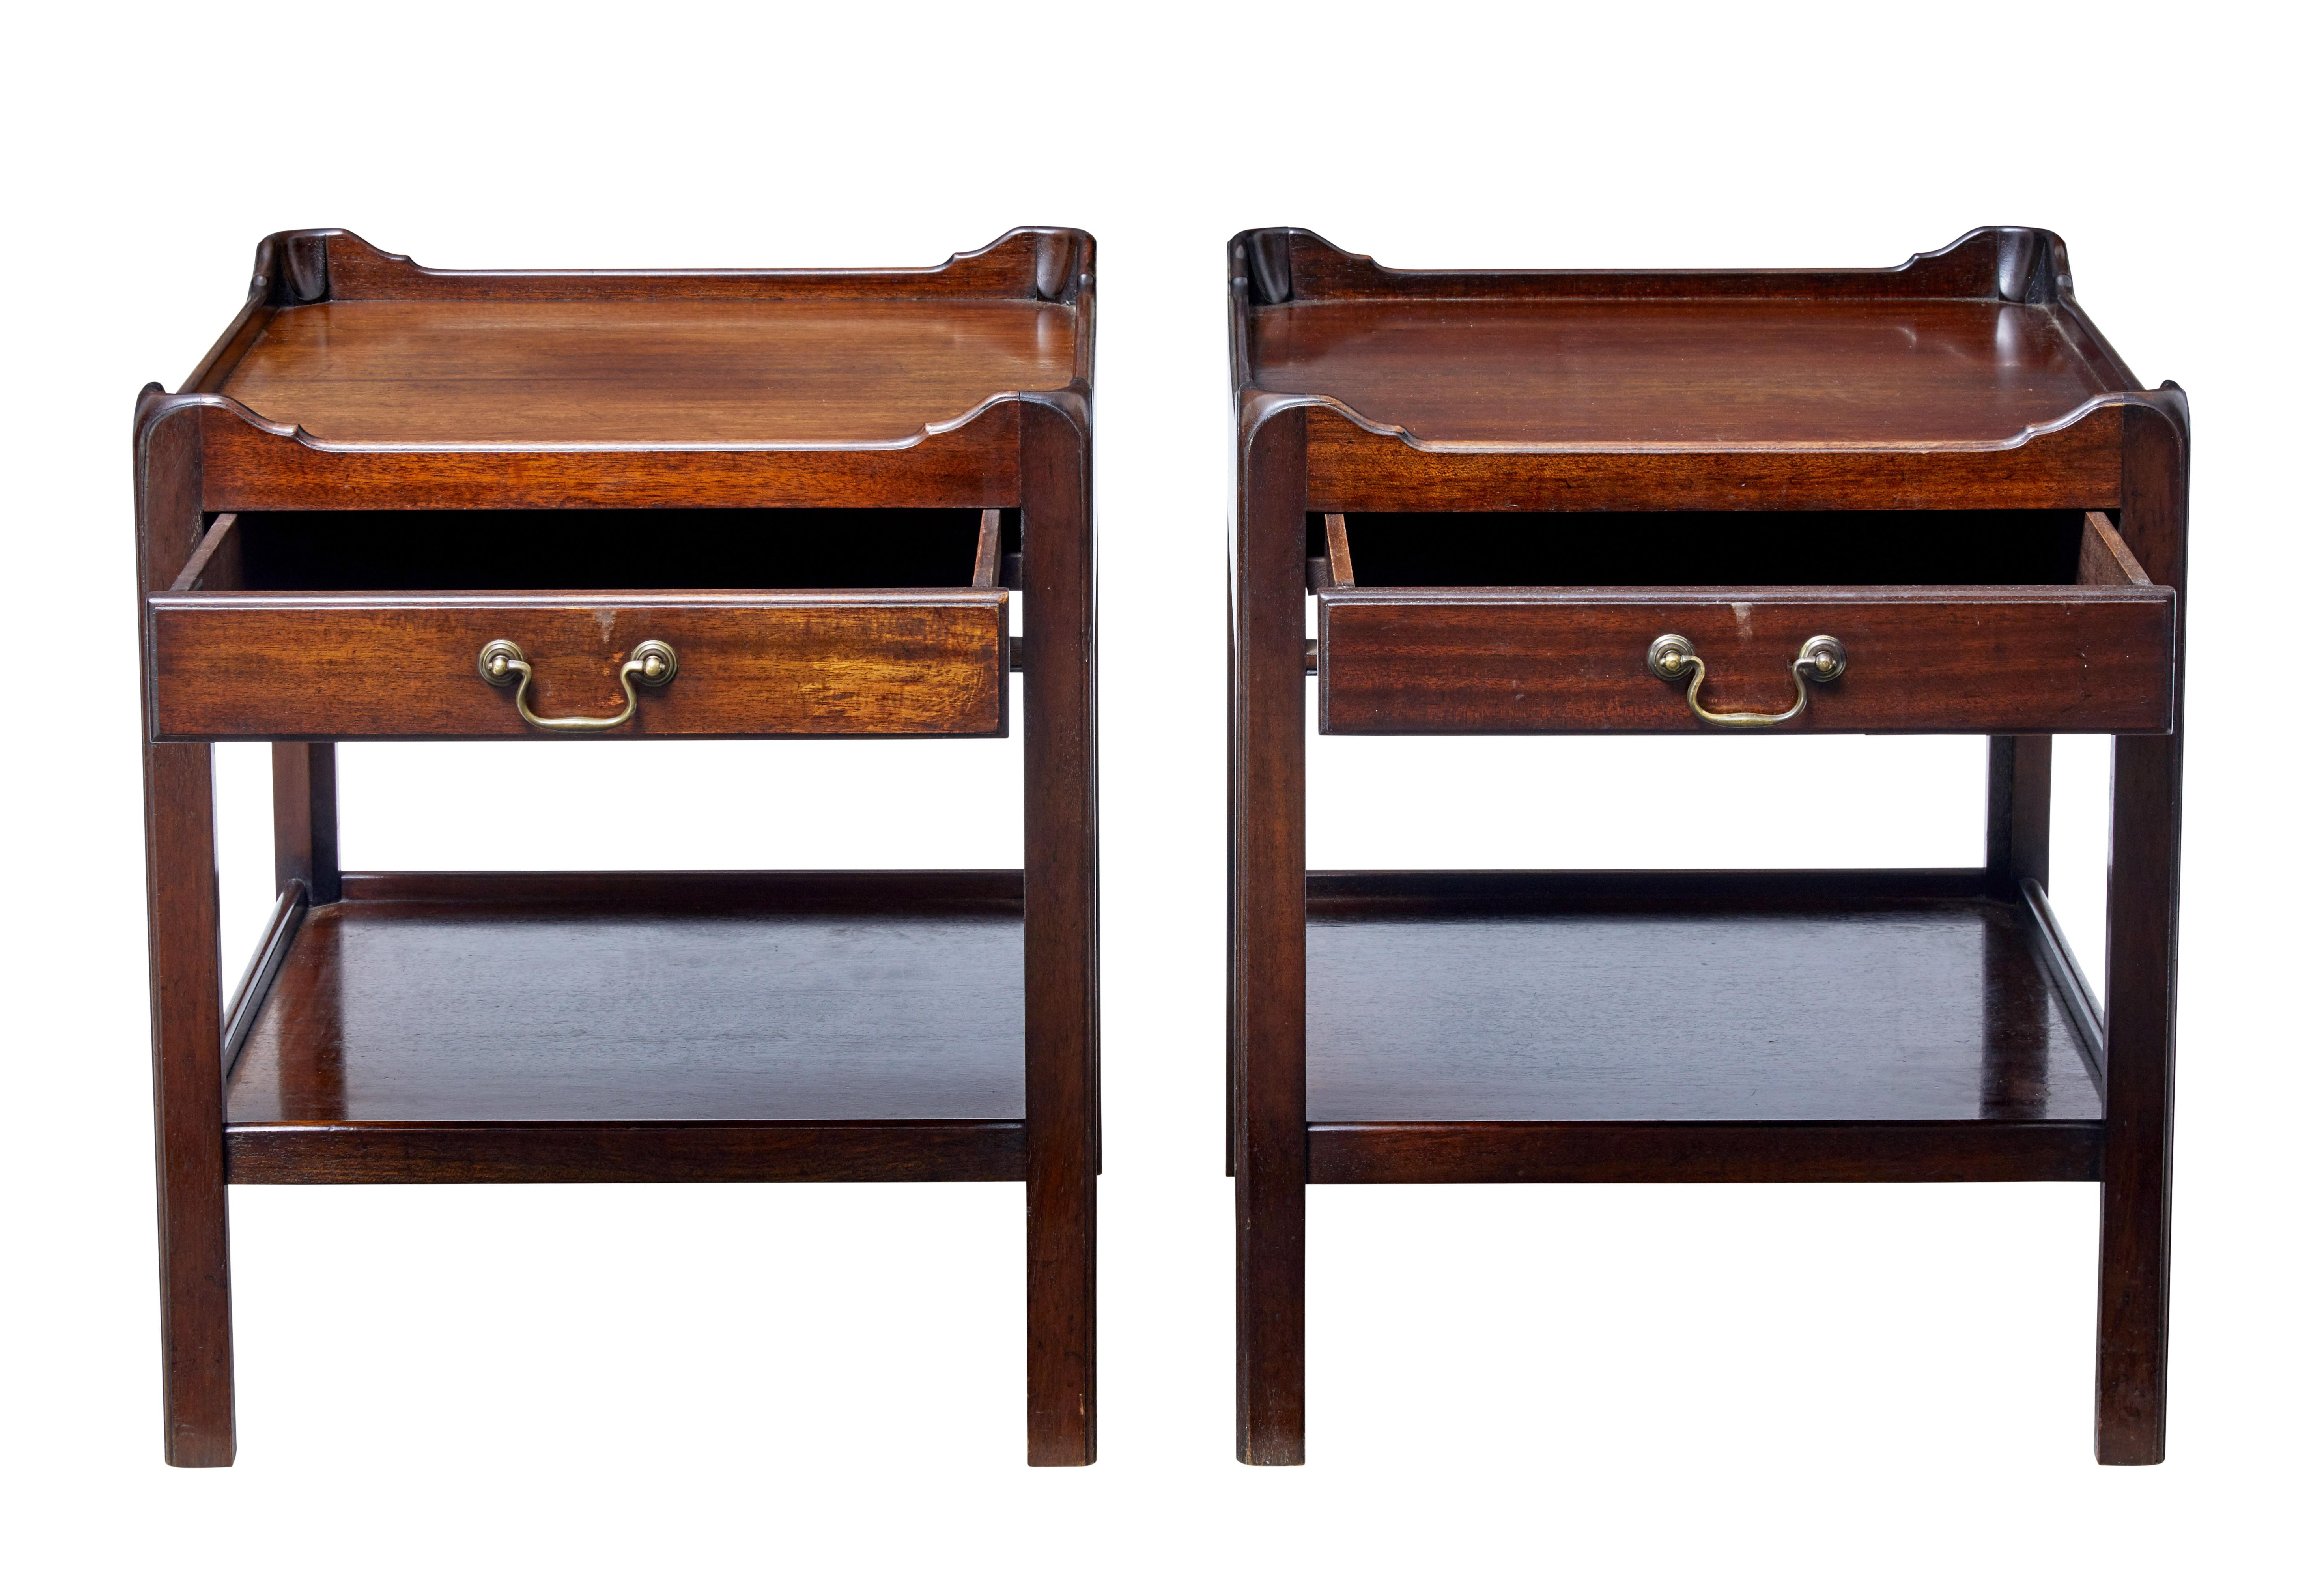 Fine pair of English made bedside tables, circa 1970.

Gallery top with single drawer in the front below which a shelf between the legs.

Rich mahogany color.

Slight variation in color between the two pieces.